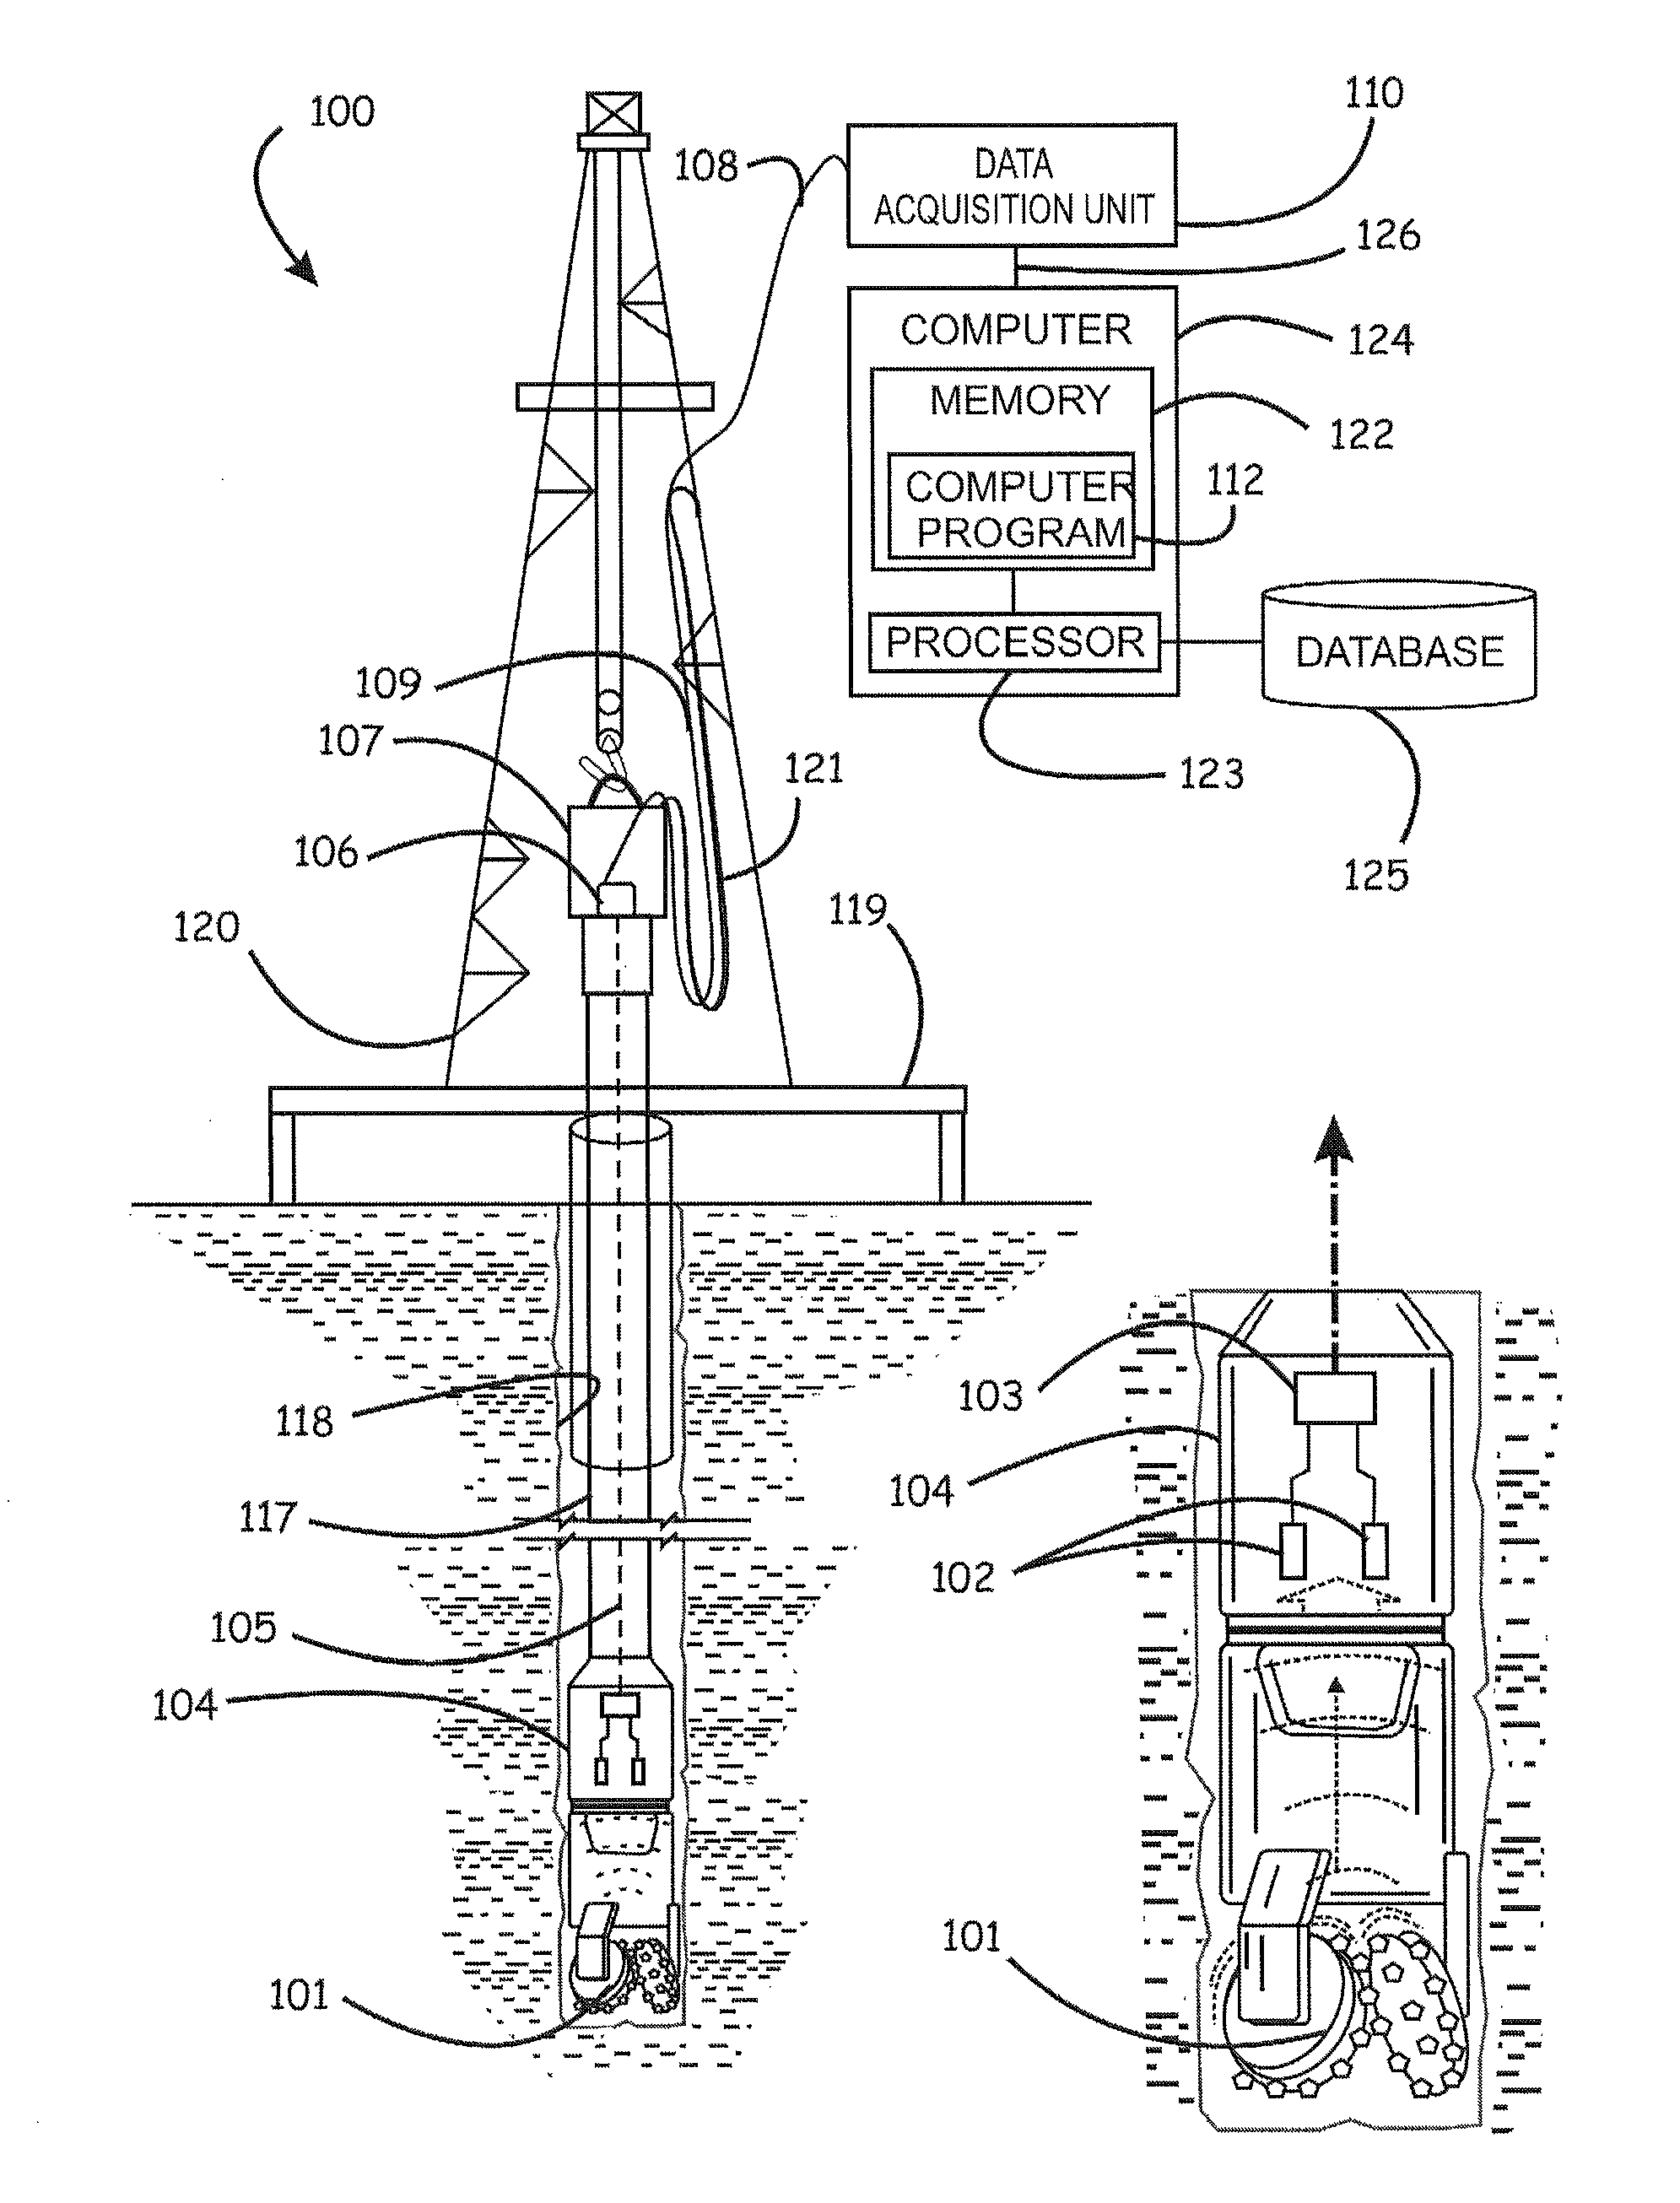 Apparatus, program product, and methods of evaluating rock properties while drilling using downhole acoustic sensors and a downhole broadband transmitting system